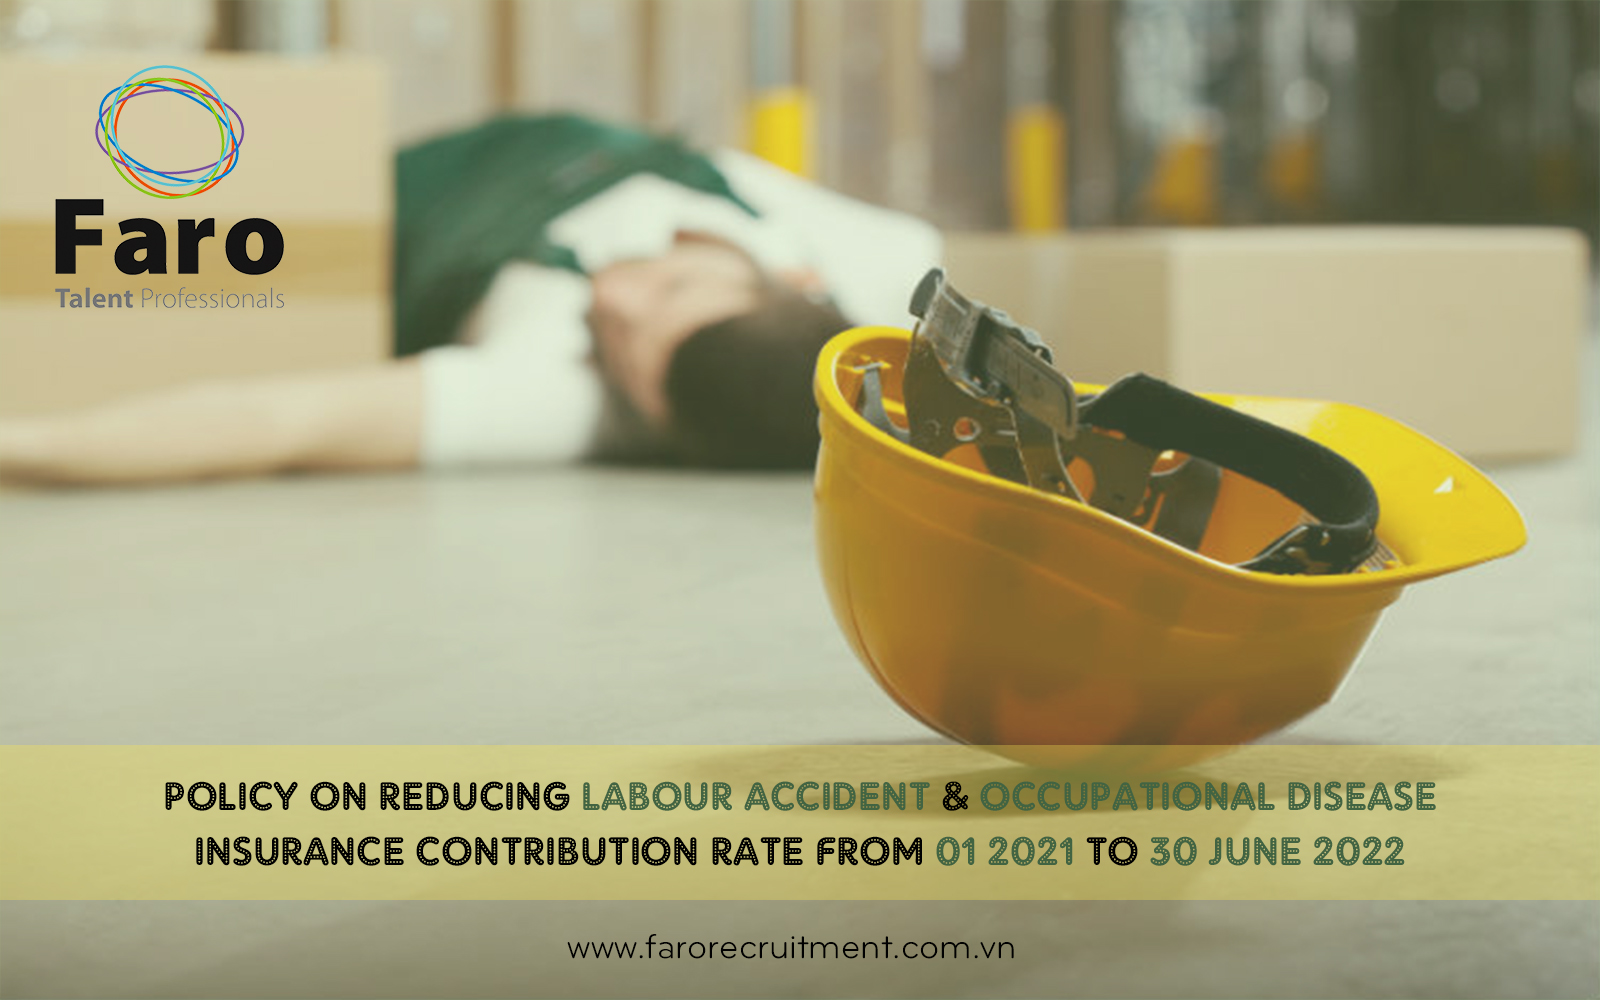 Policy on reducing labor accident and occupational disease insurance contribution rate